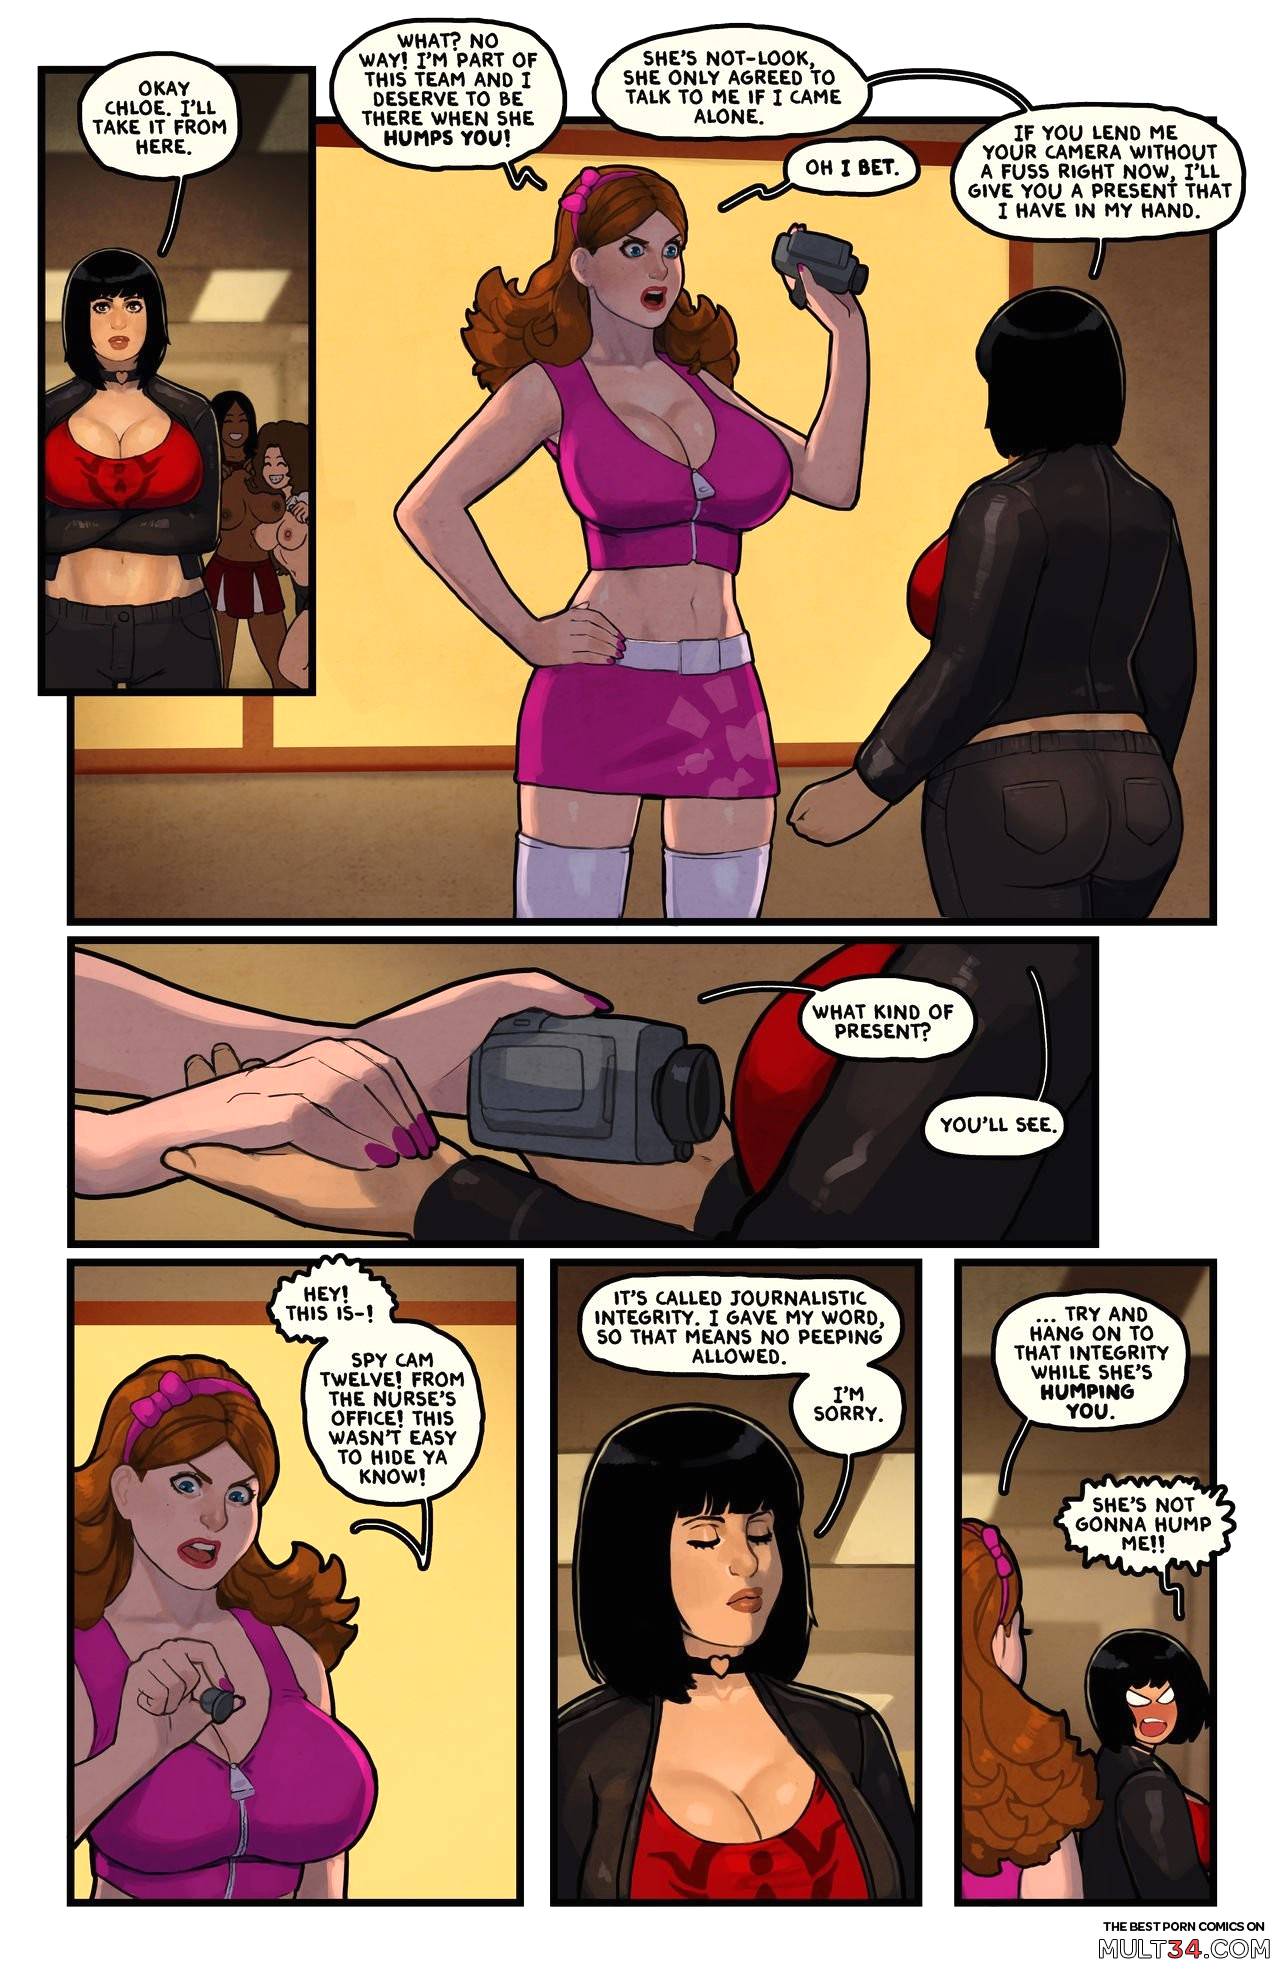 This Romantic World 6 page 42